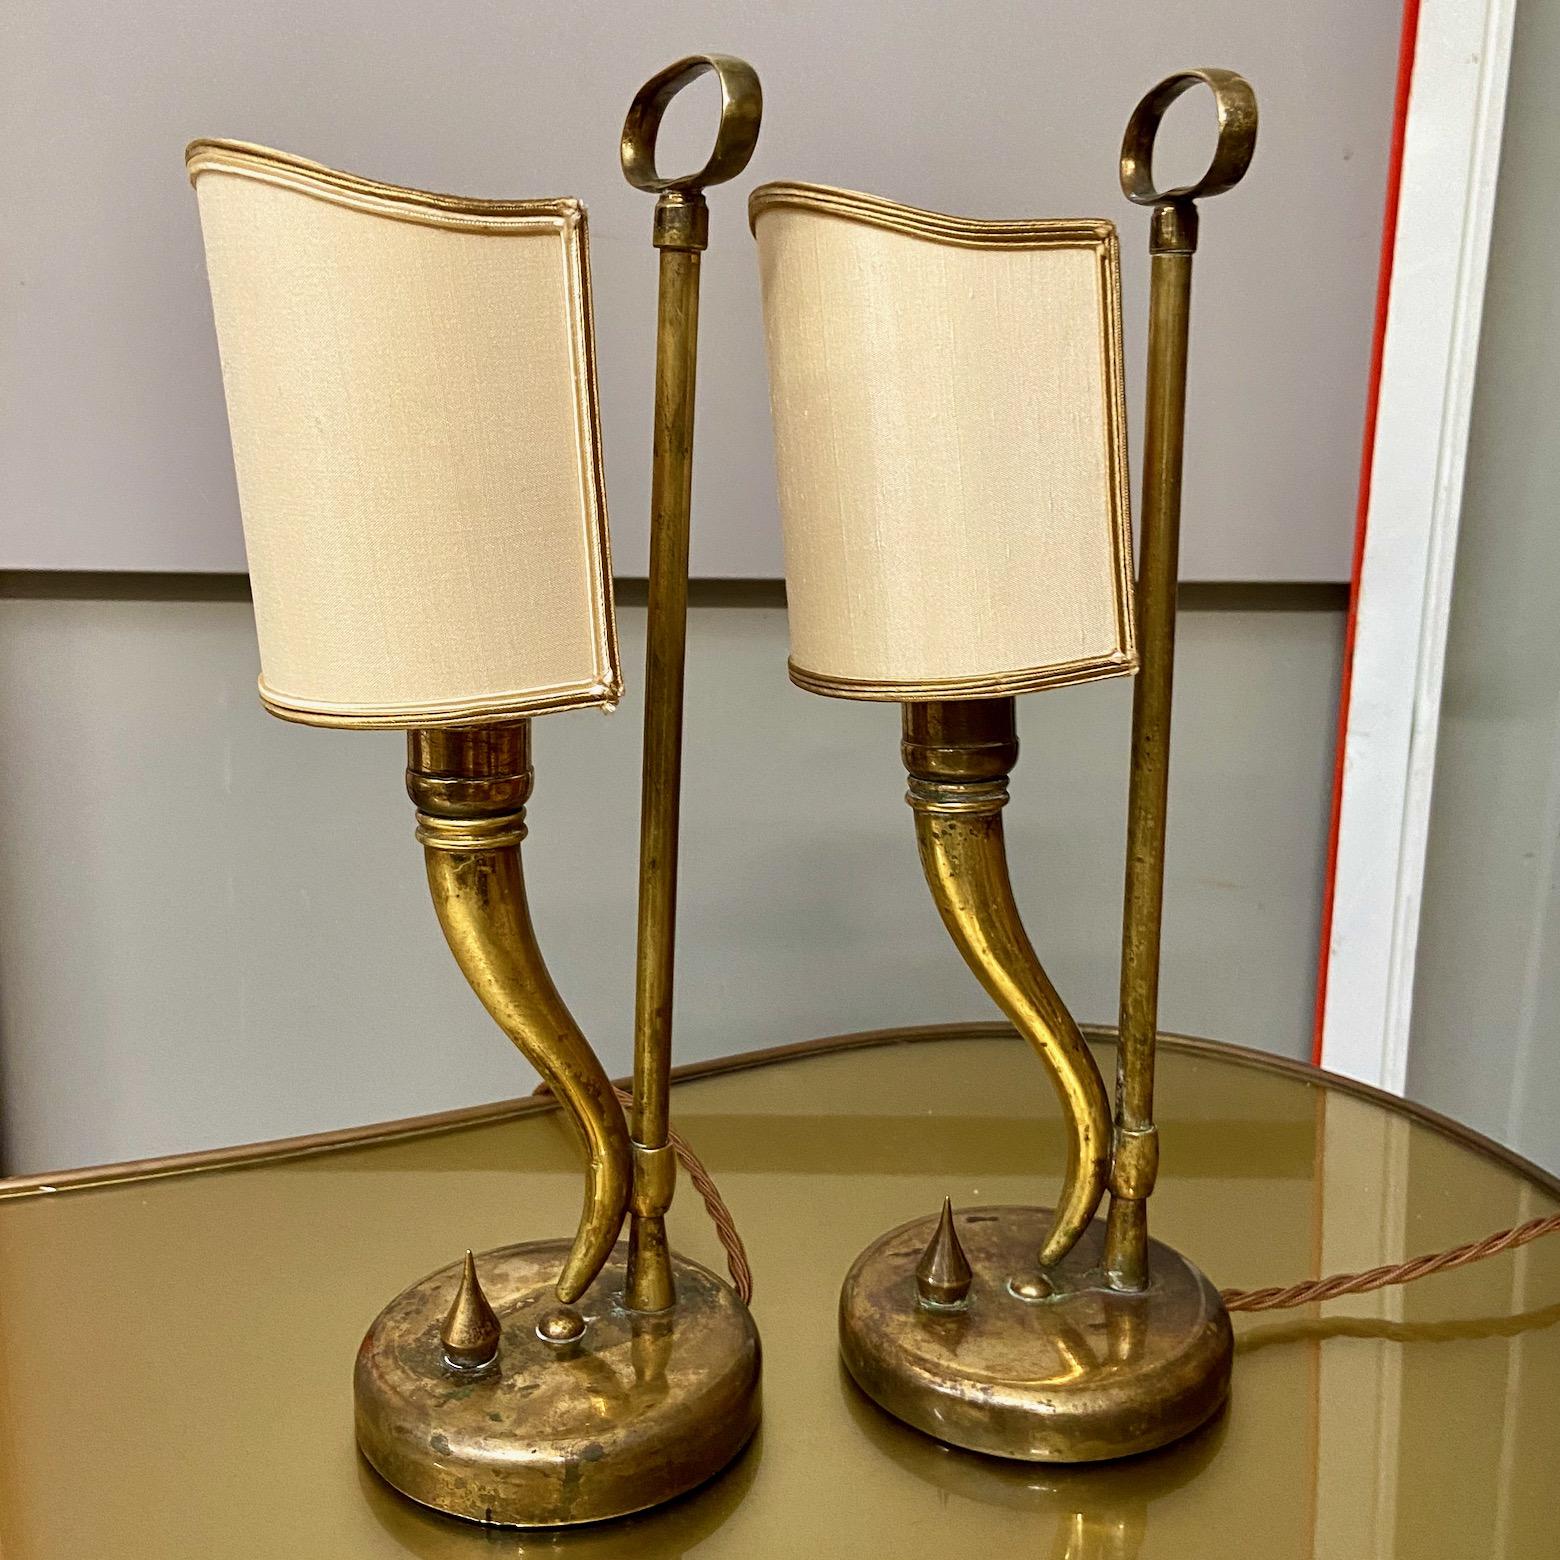 1940s / 50s brass table lamps attributed to Gio Ponti and Emilio Lancia, a pair In Good Condition For Sale In London, GB